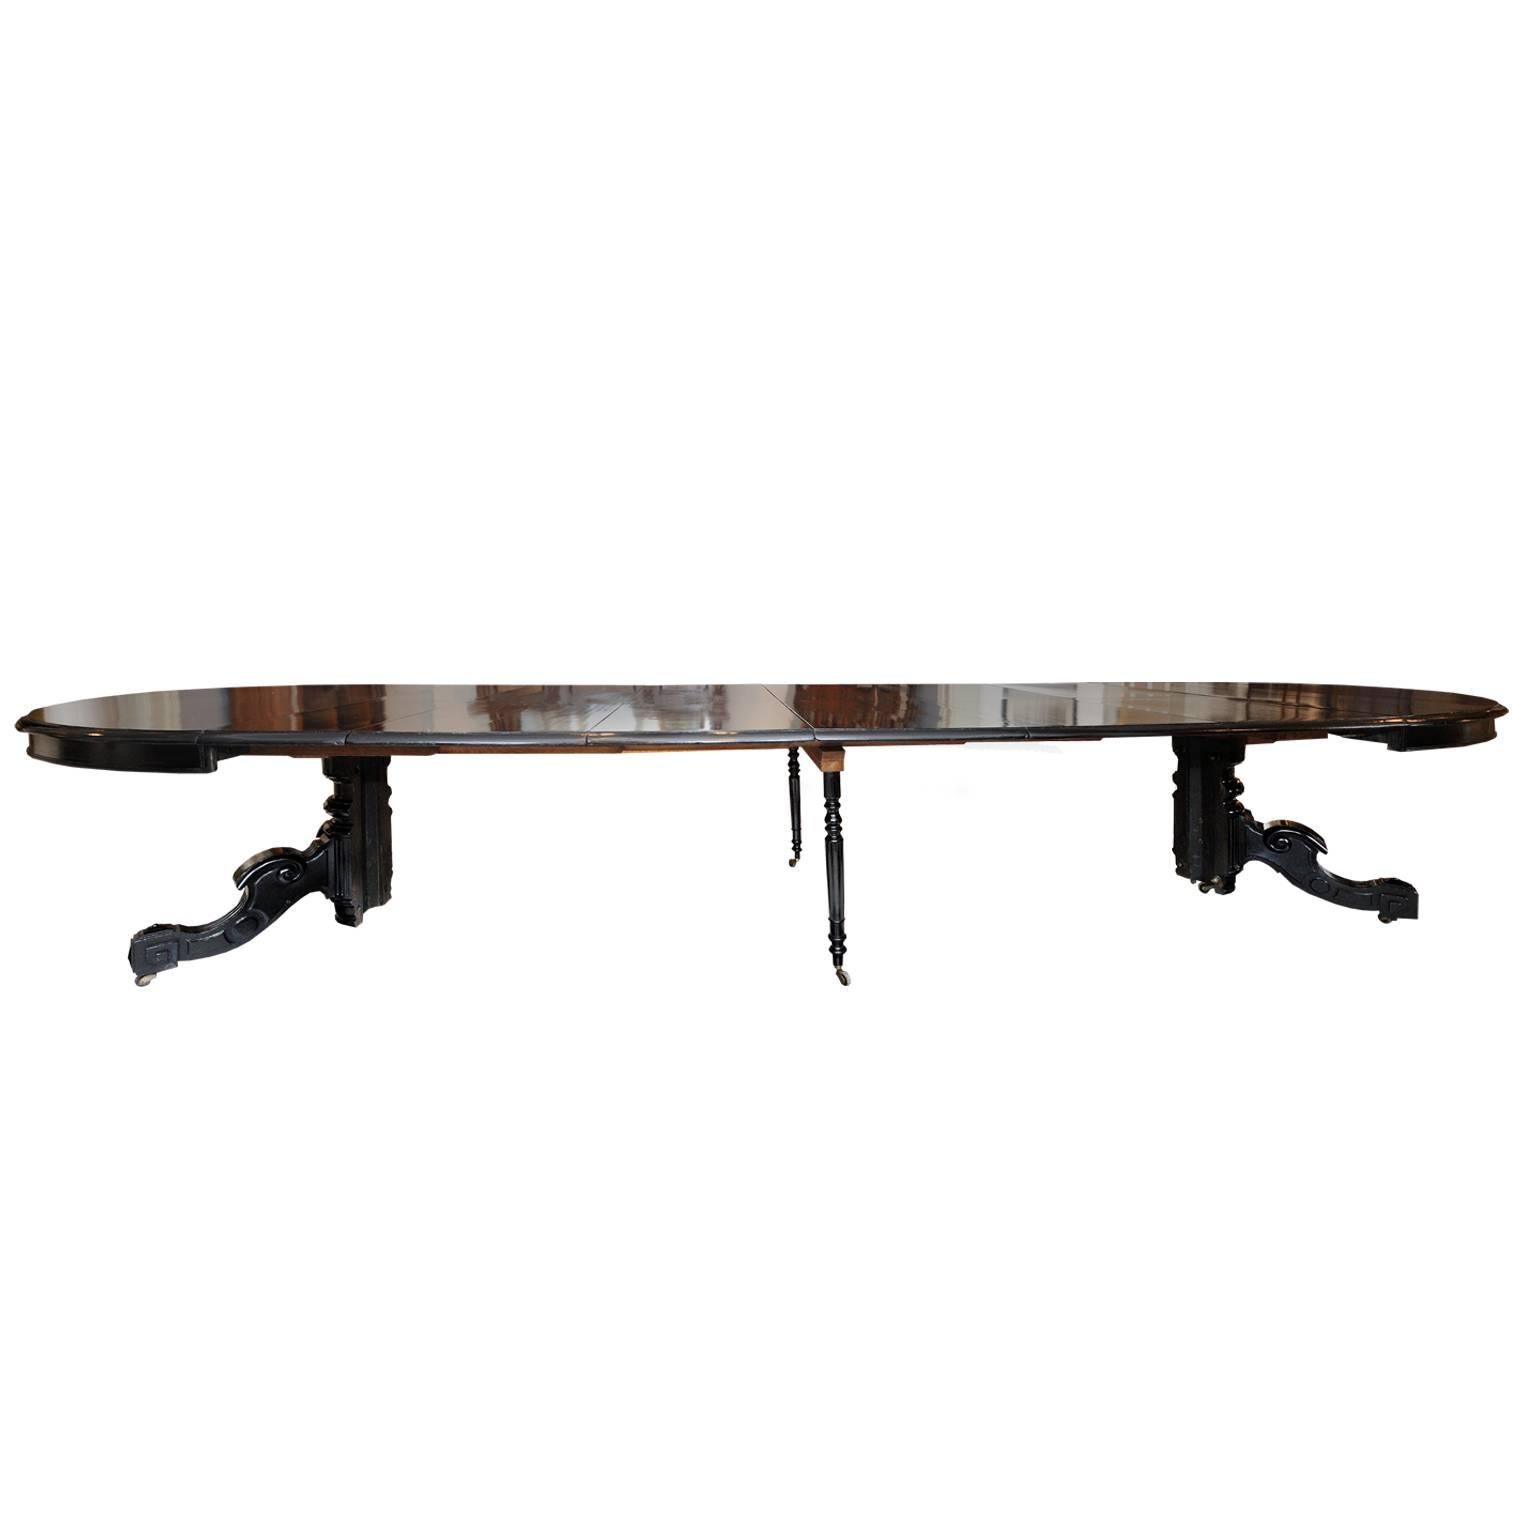 This is an extremely impressive and uniquely versatile large French mid-19th century extending black ebonised Dining Table with six drop-in leaves, extending to over 14' on metamorphic legs and capable of sitting 14+ people. When closed, it forms an